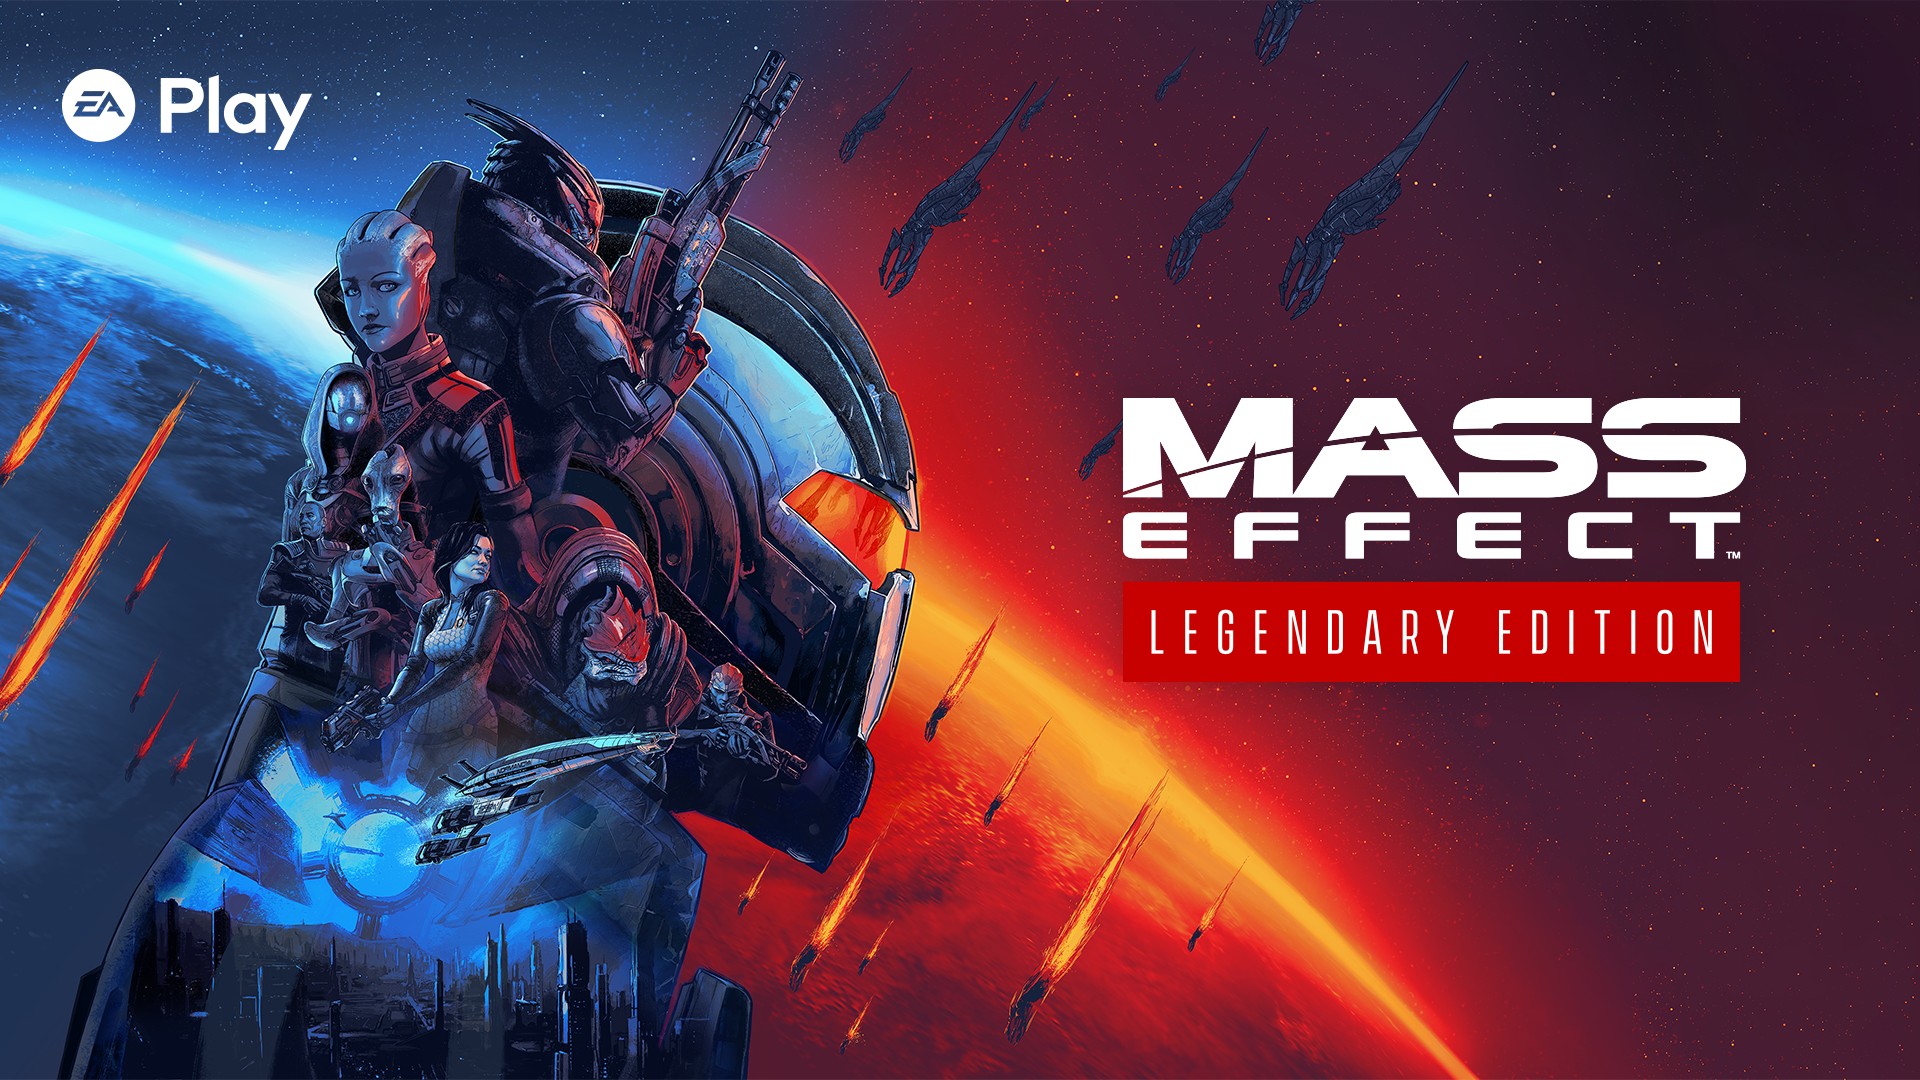 Mass Effect Legendary Edition (Console and PC) EA Play – January 6